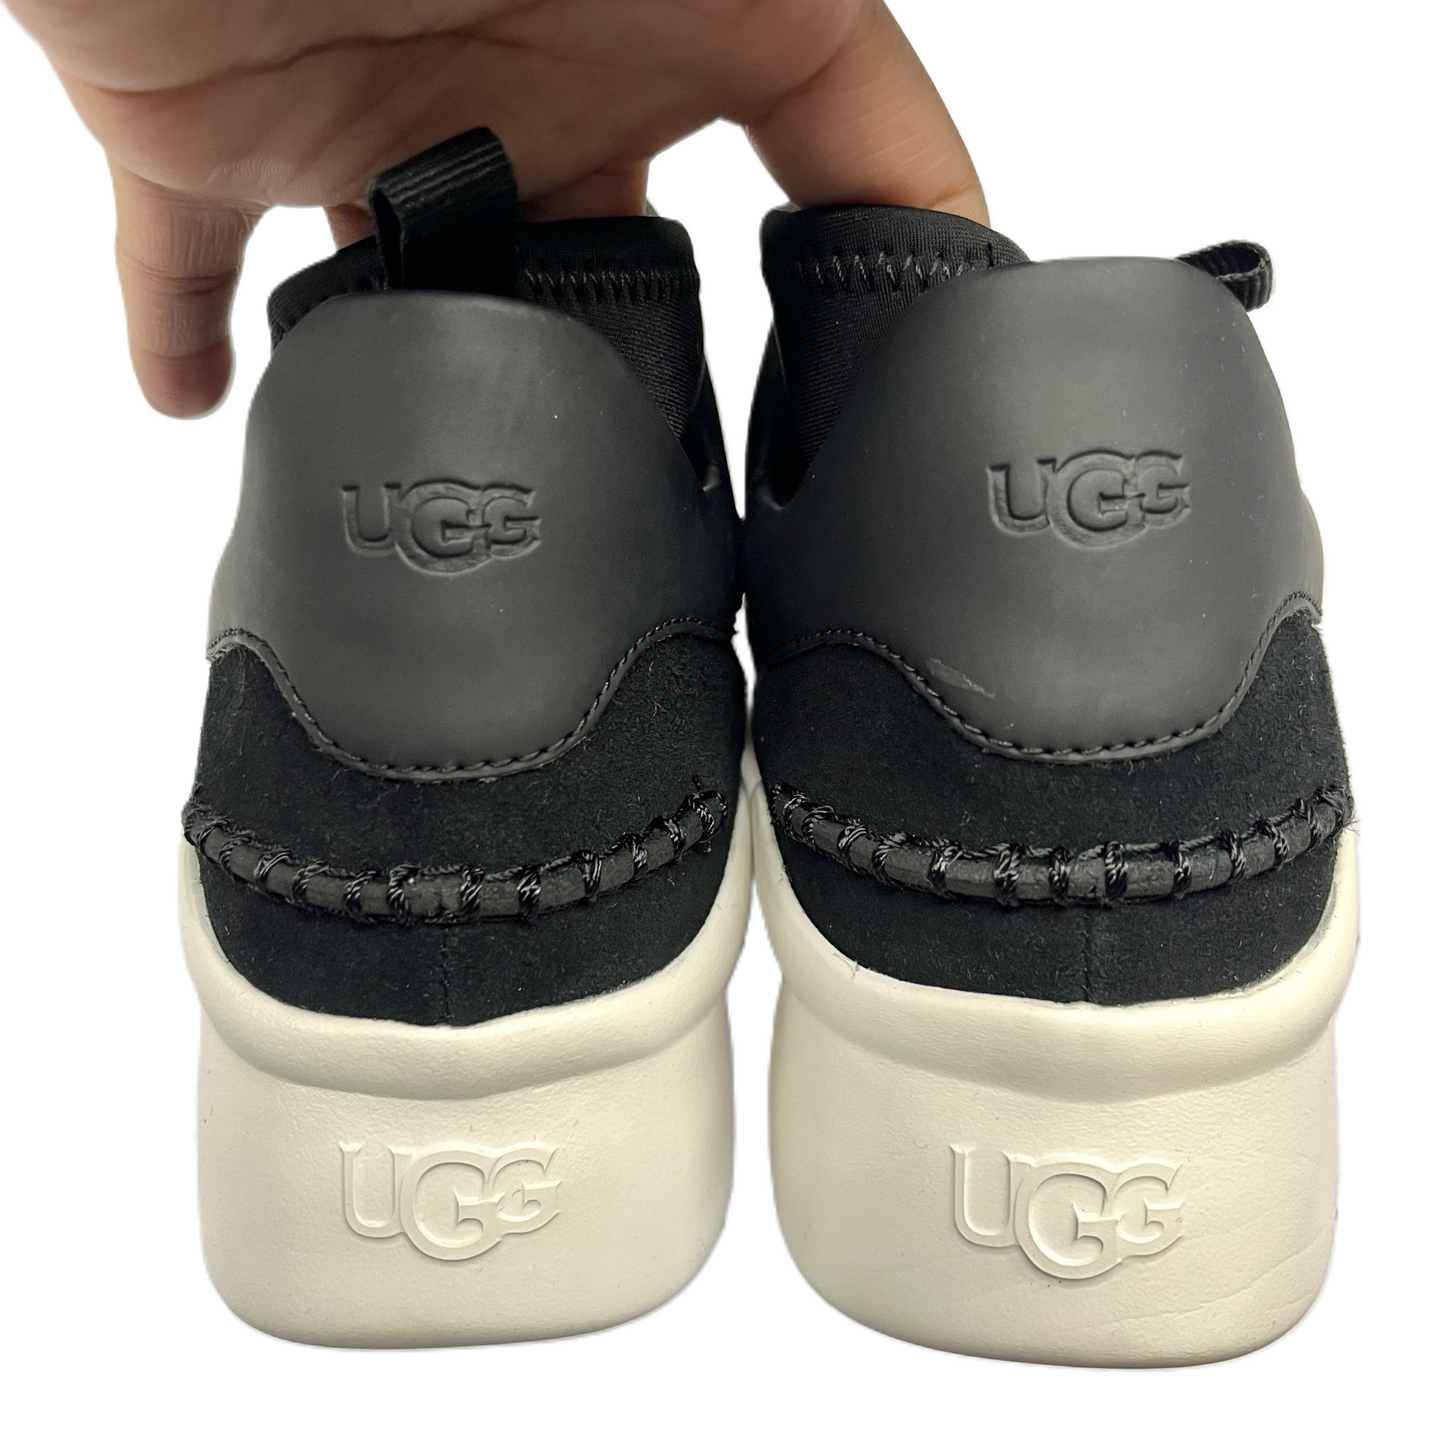 Shoes Athletic By Ugg  Size: 9